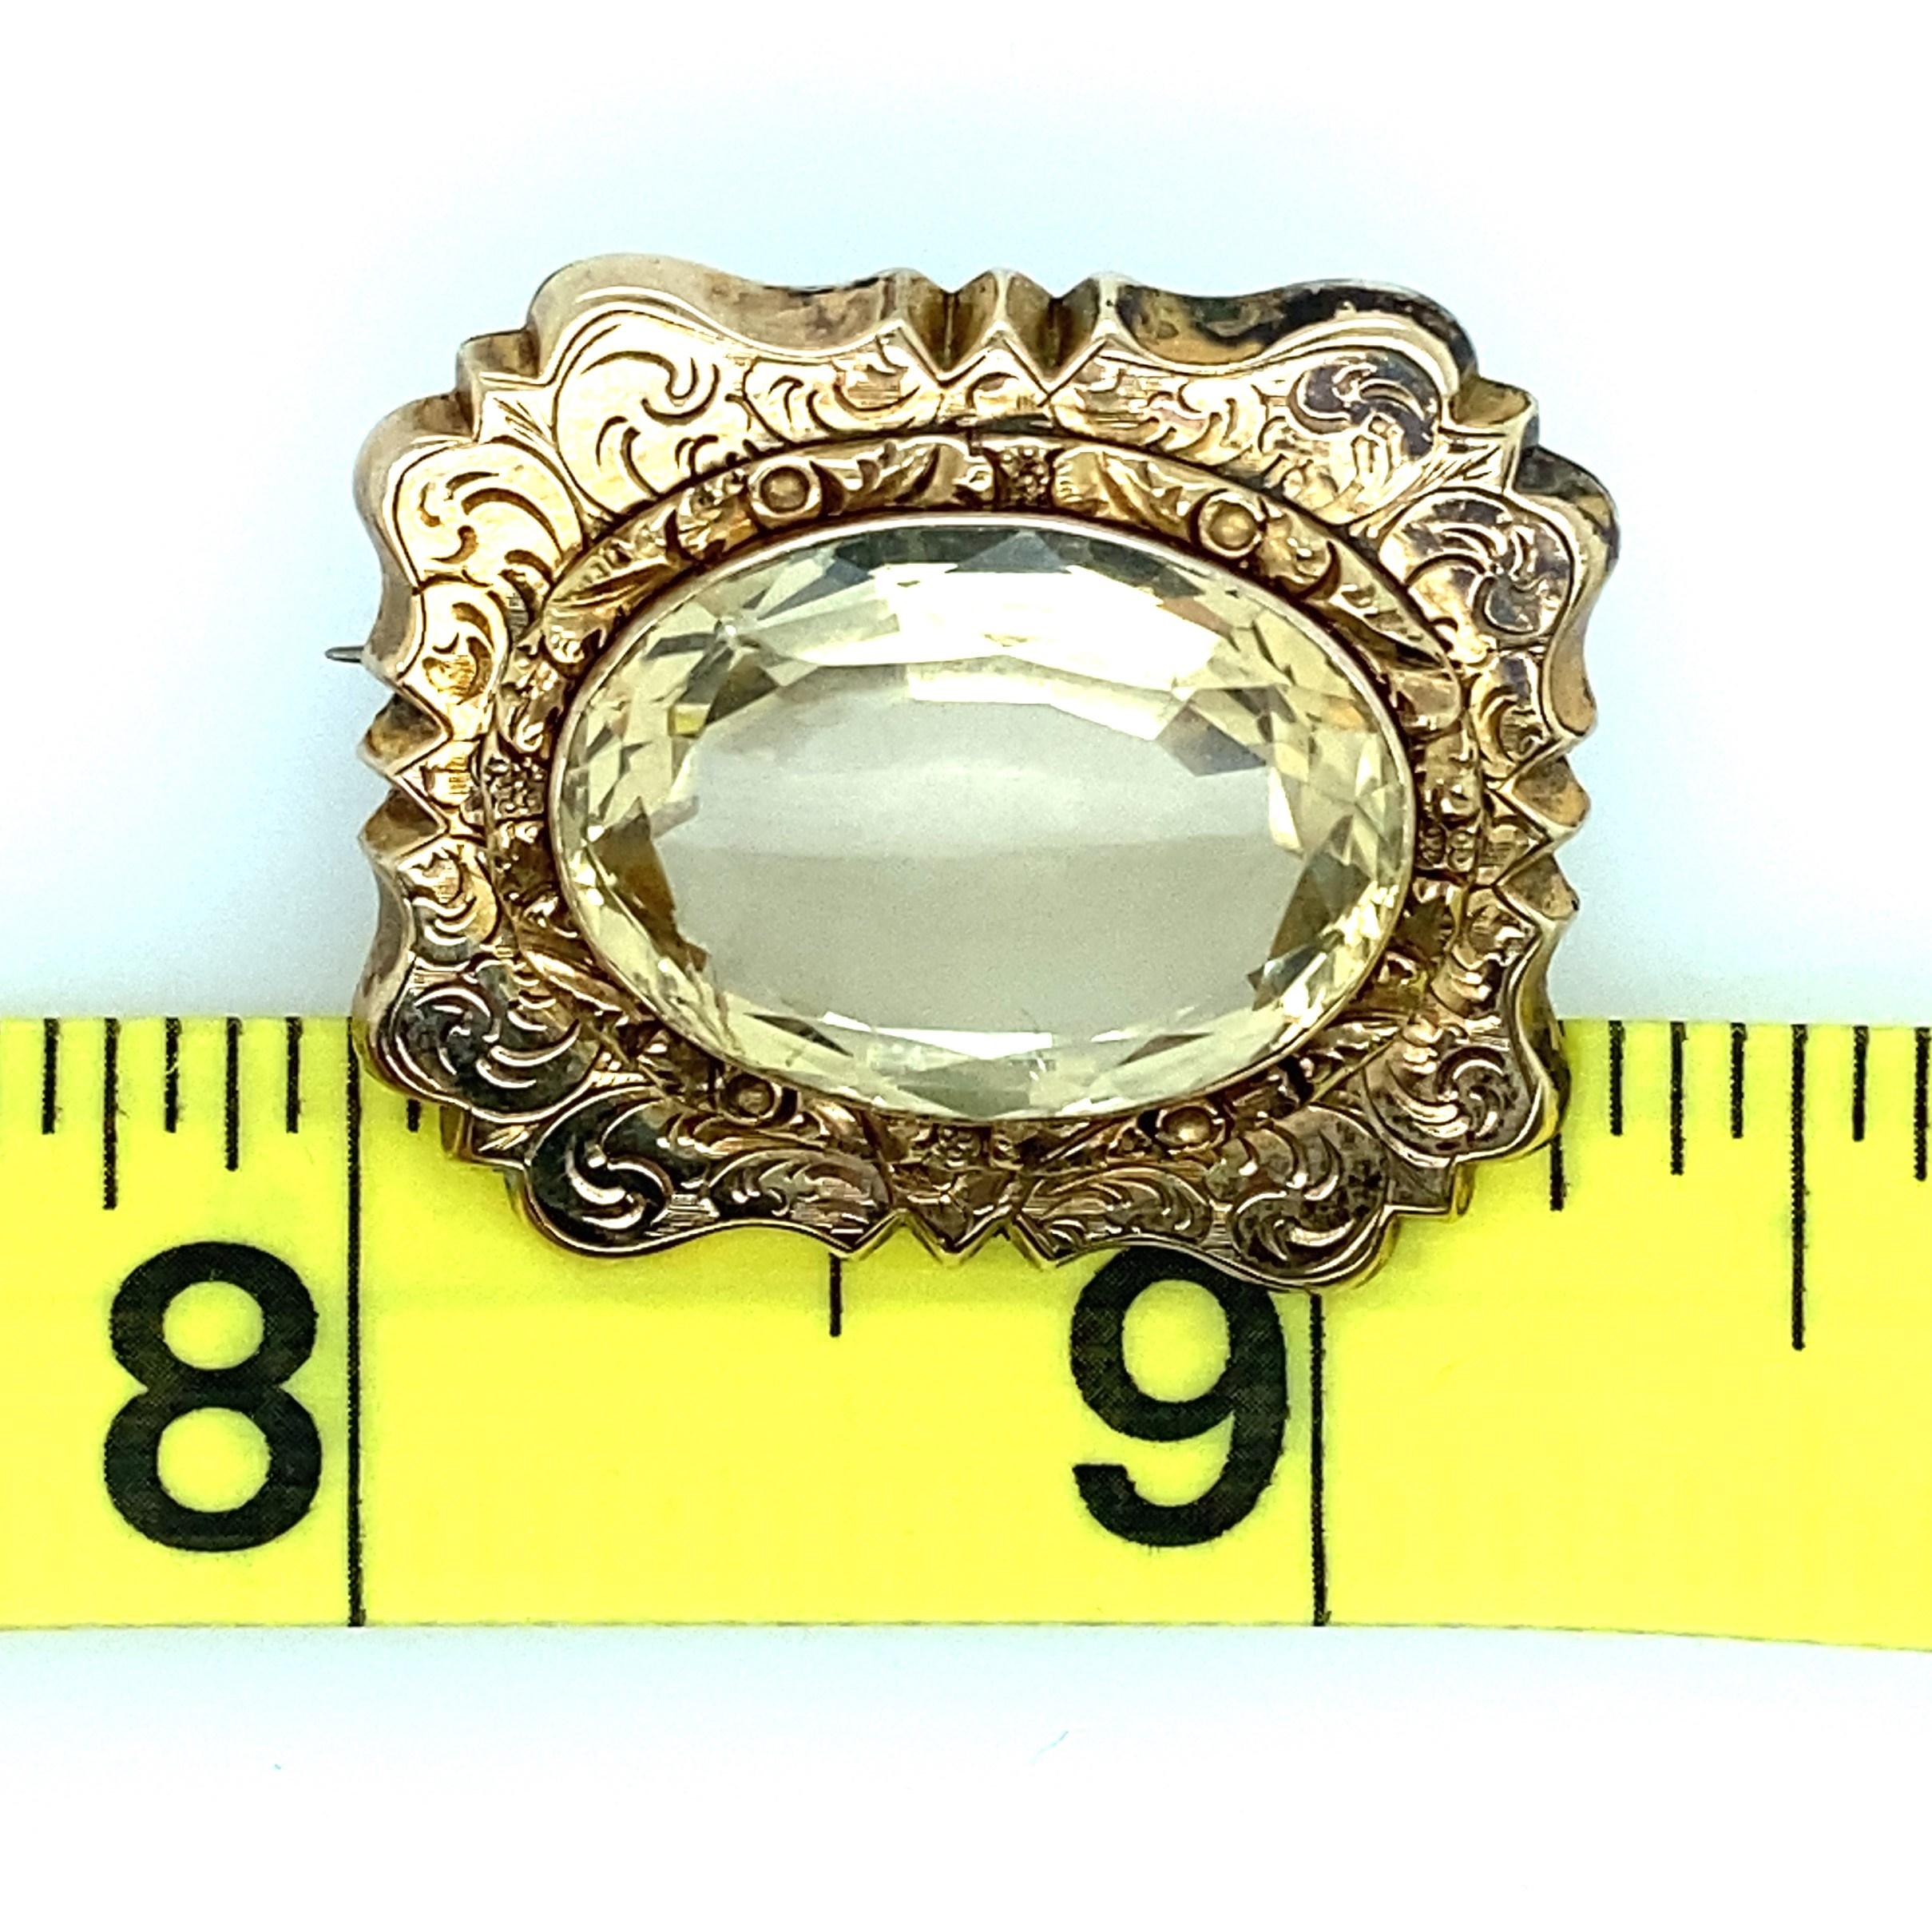 Antique 1880s Repousse Citrine Brooch In Good Condition For Sale In Towson, MD